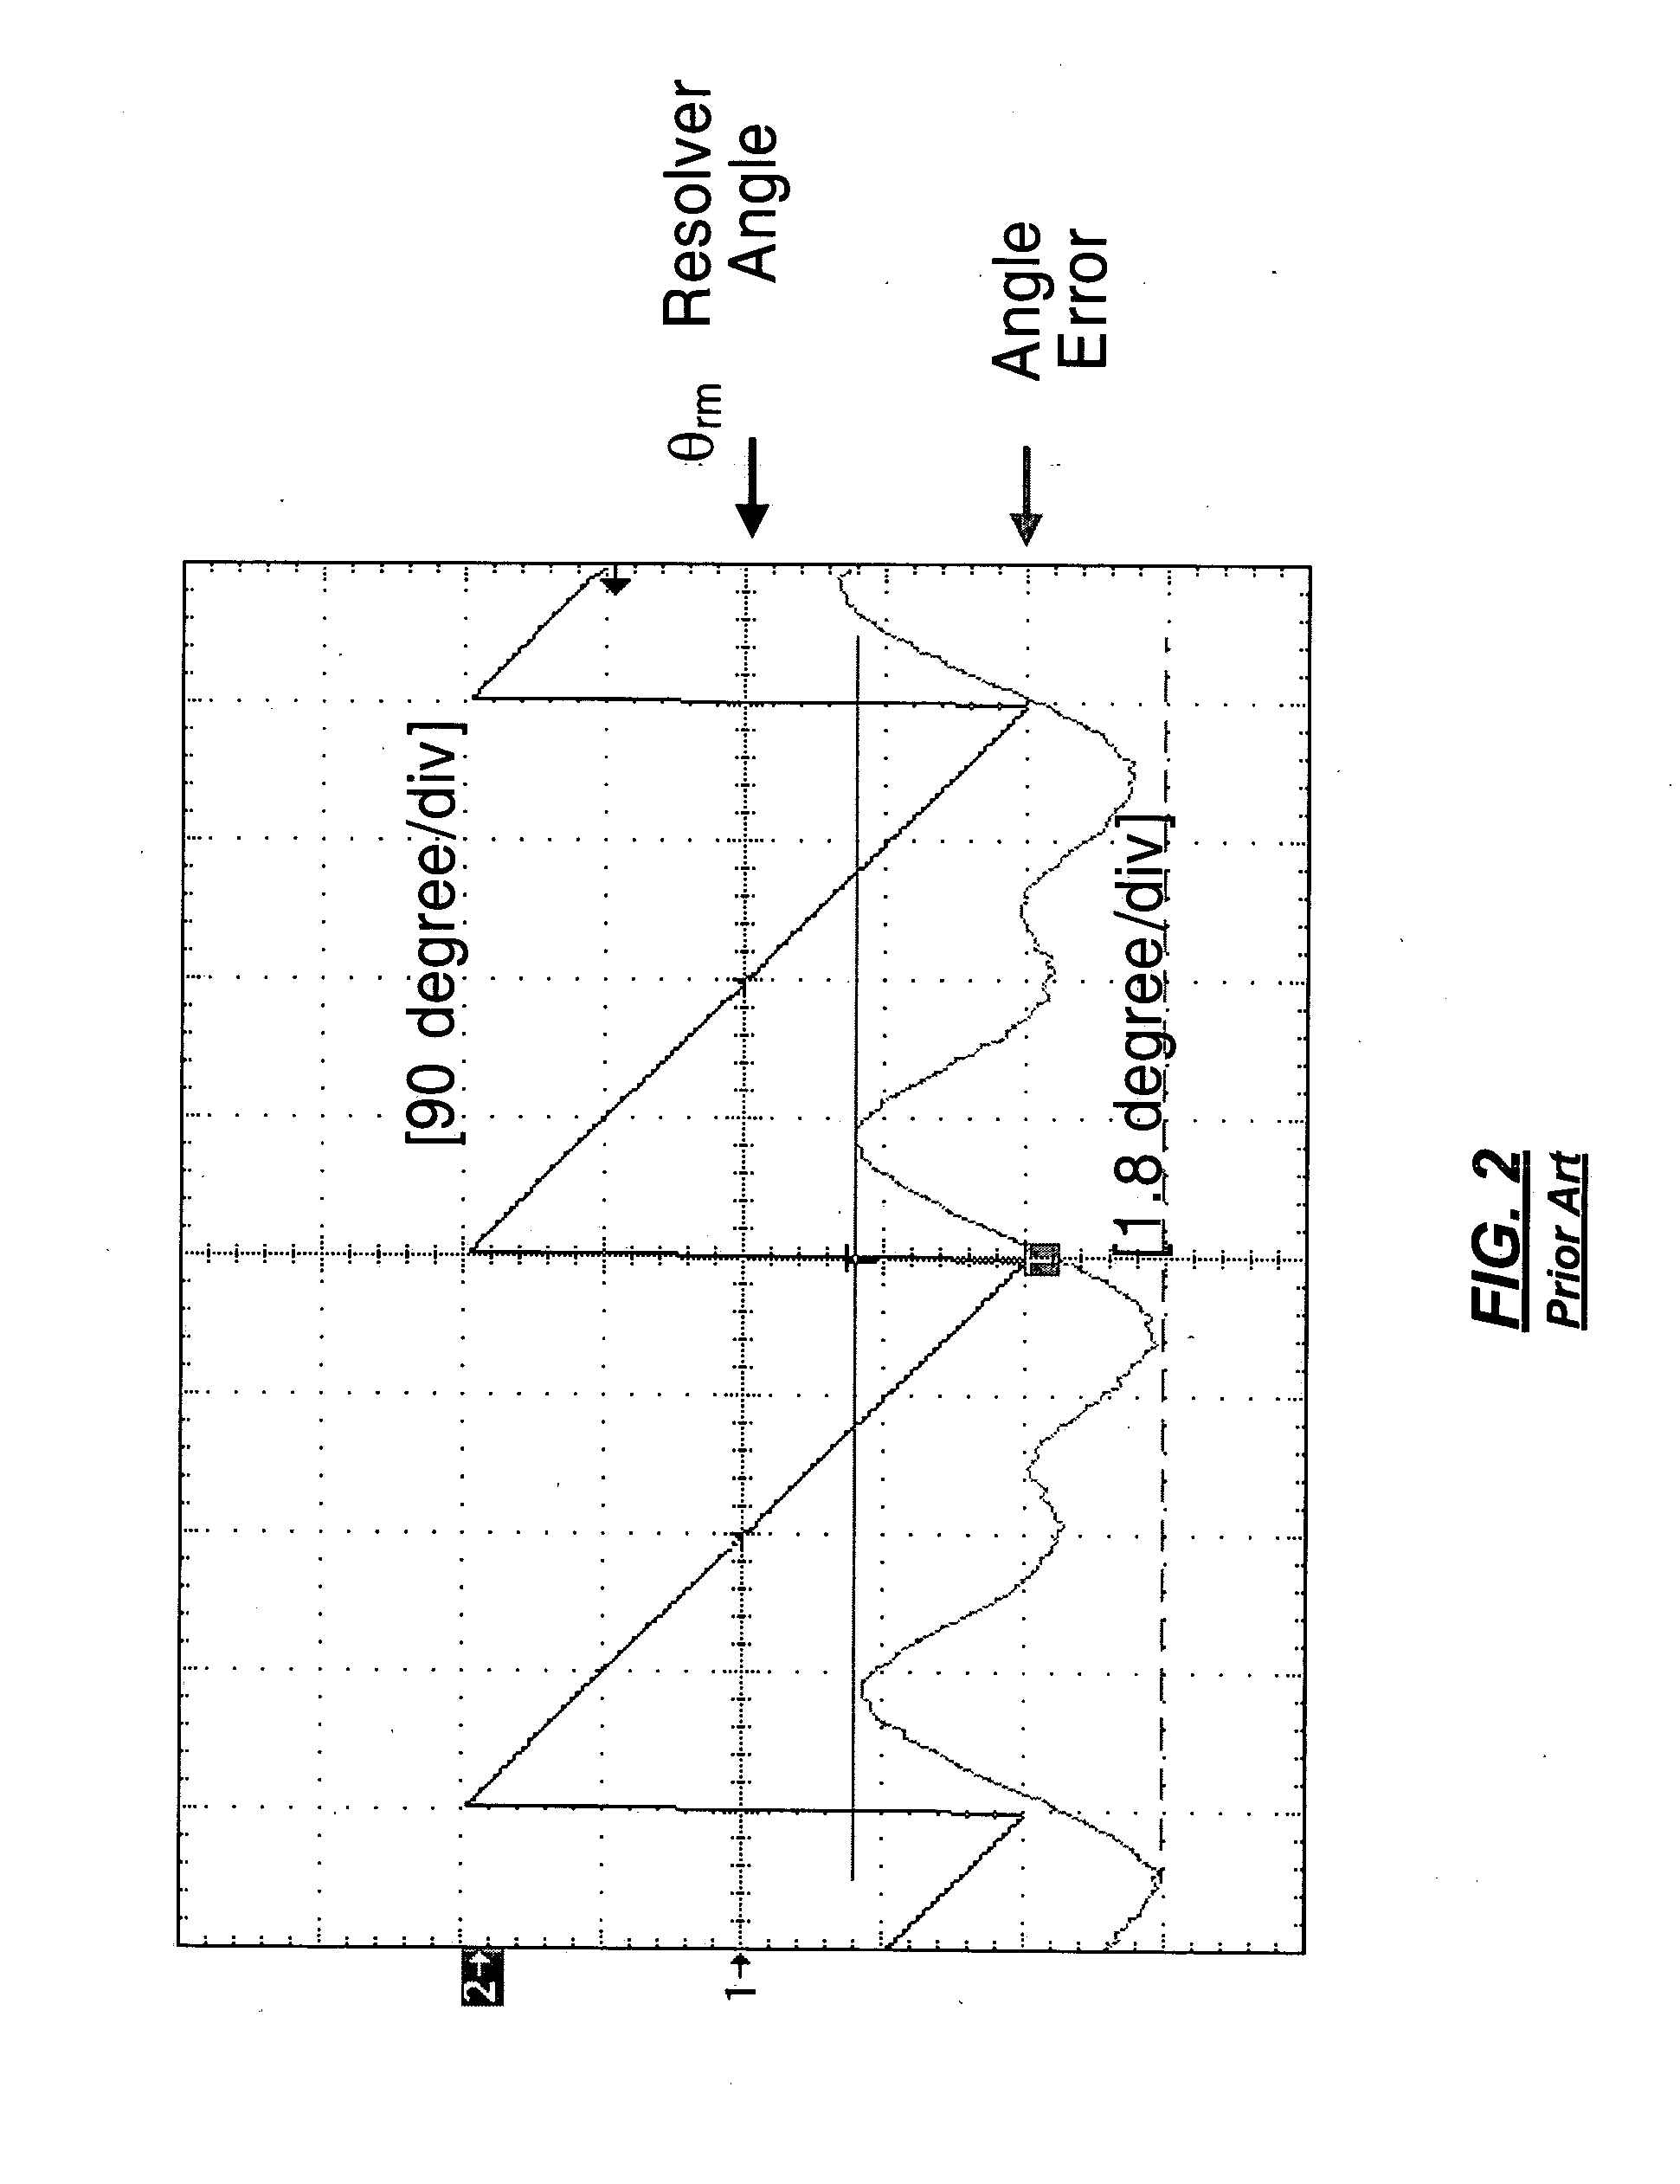 Speed measurement system for speed control of high-speed motors